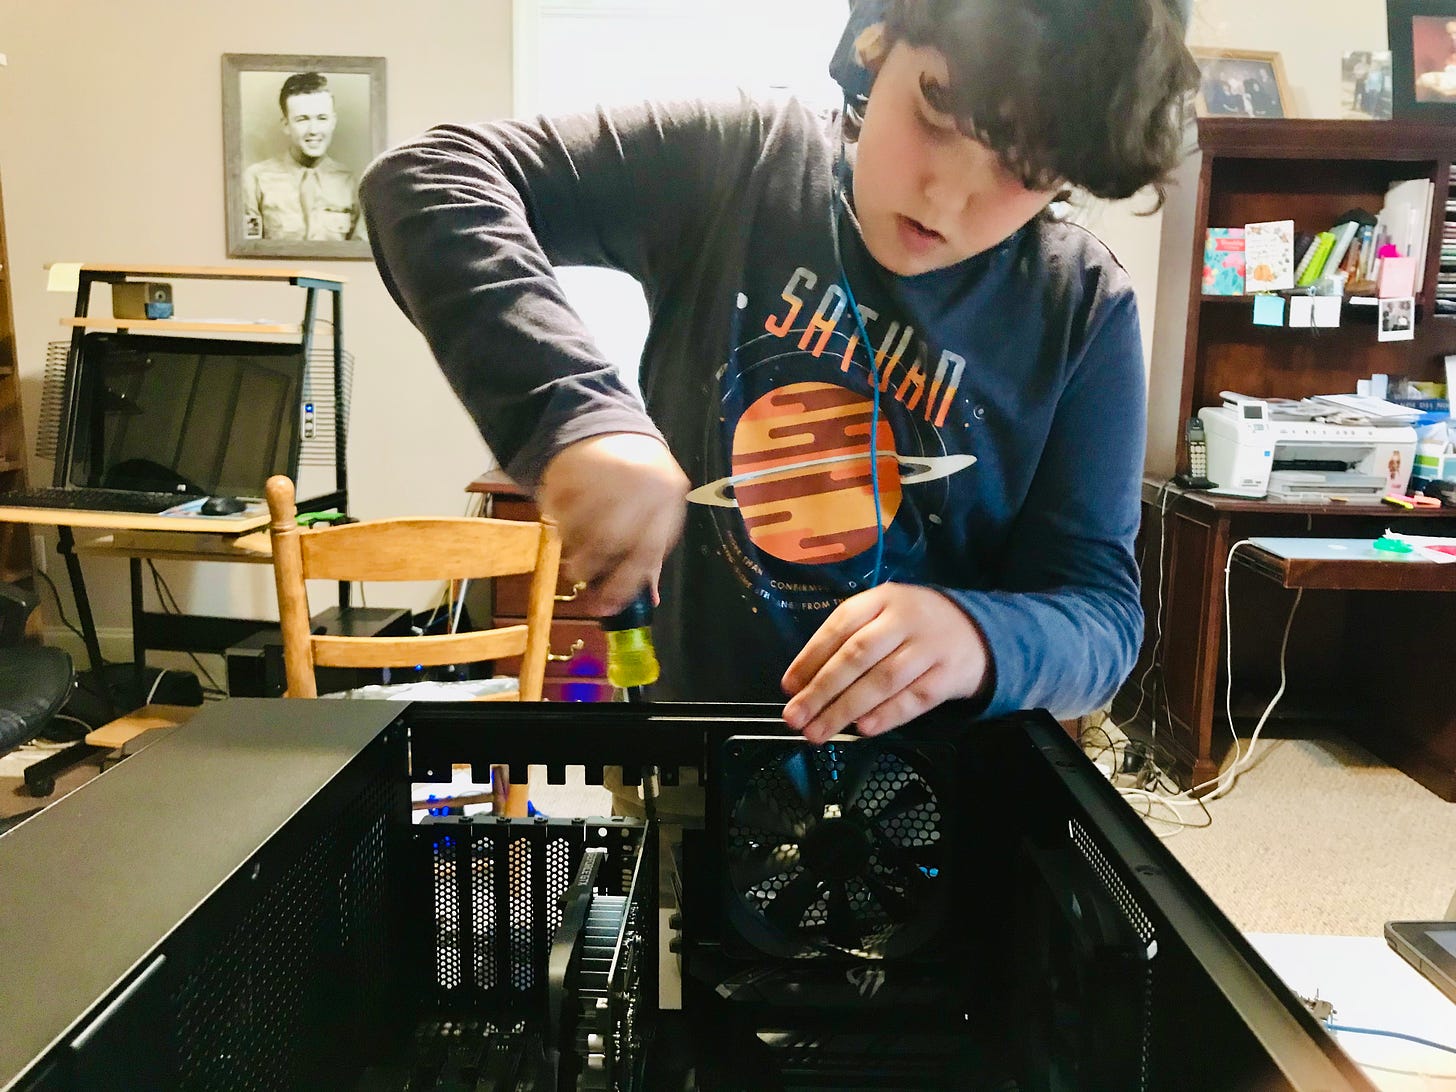 A teenager works on a computer